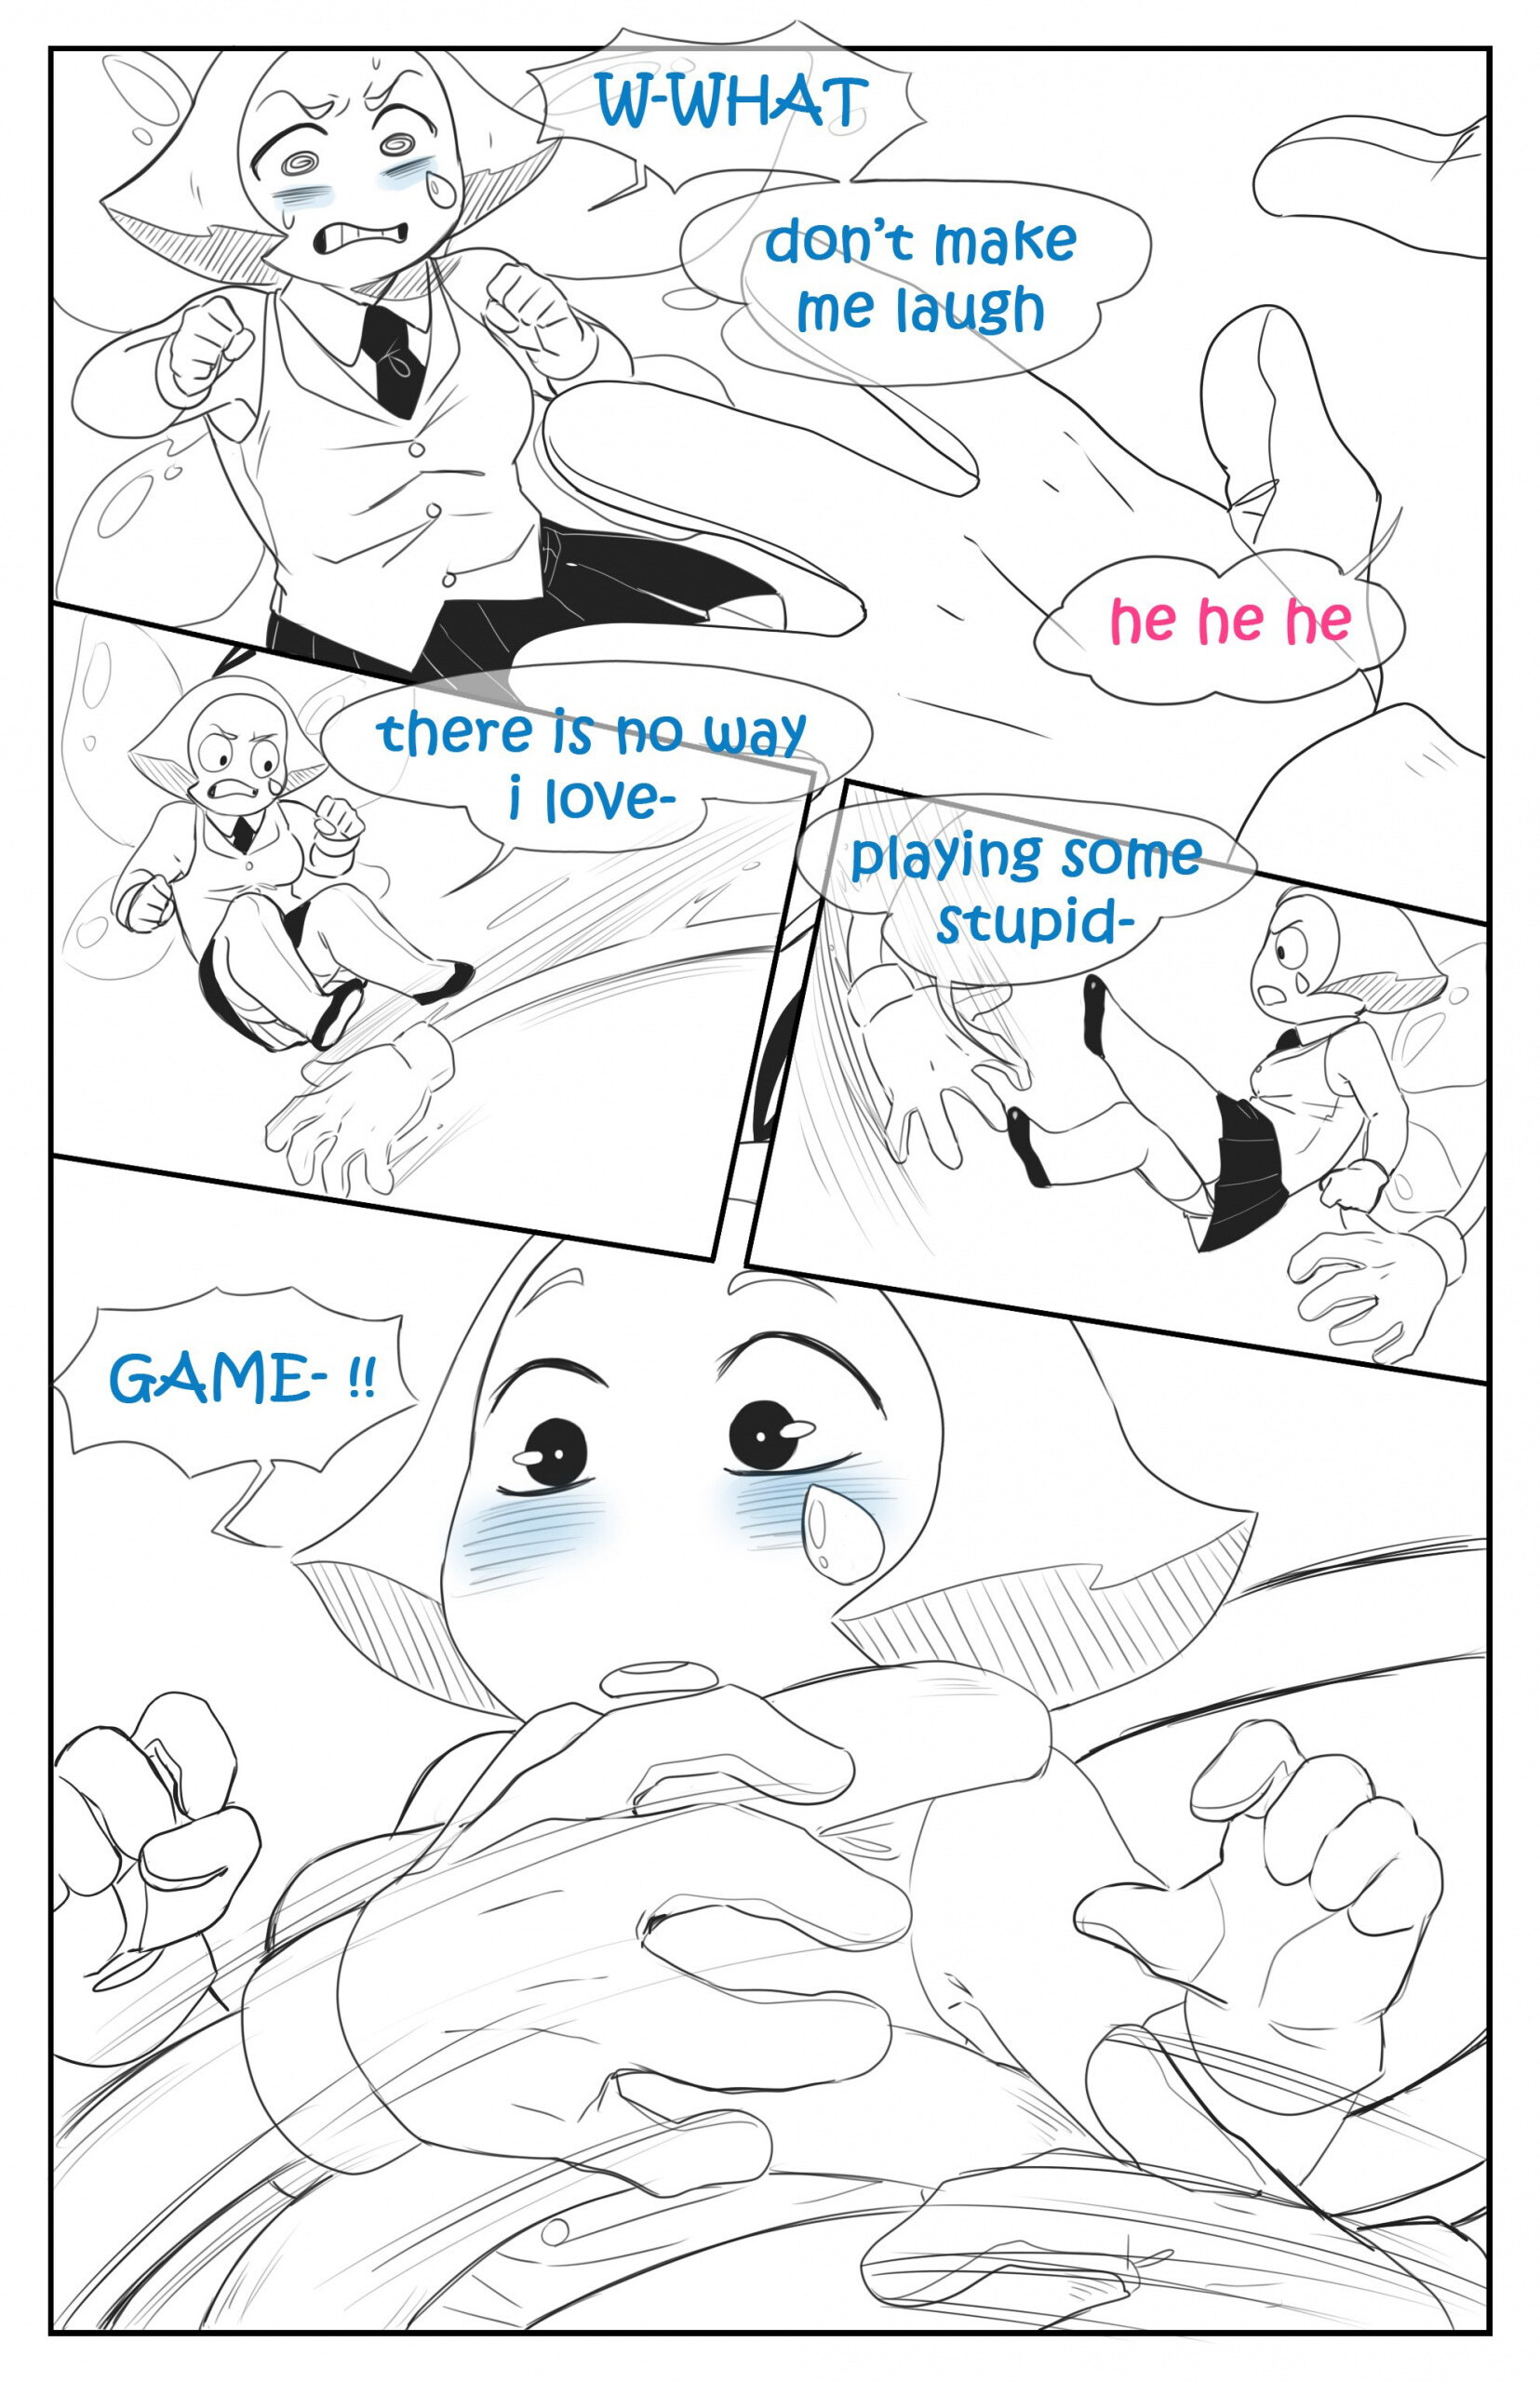 Tag, You're It! - Page 3